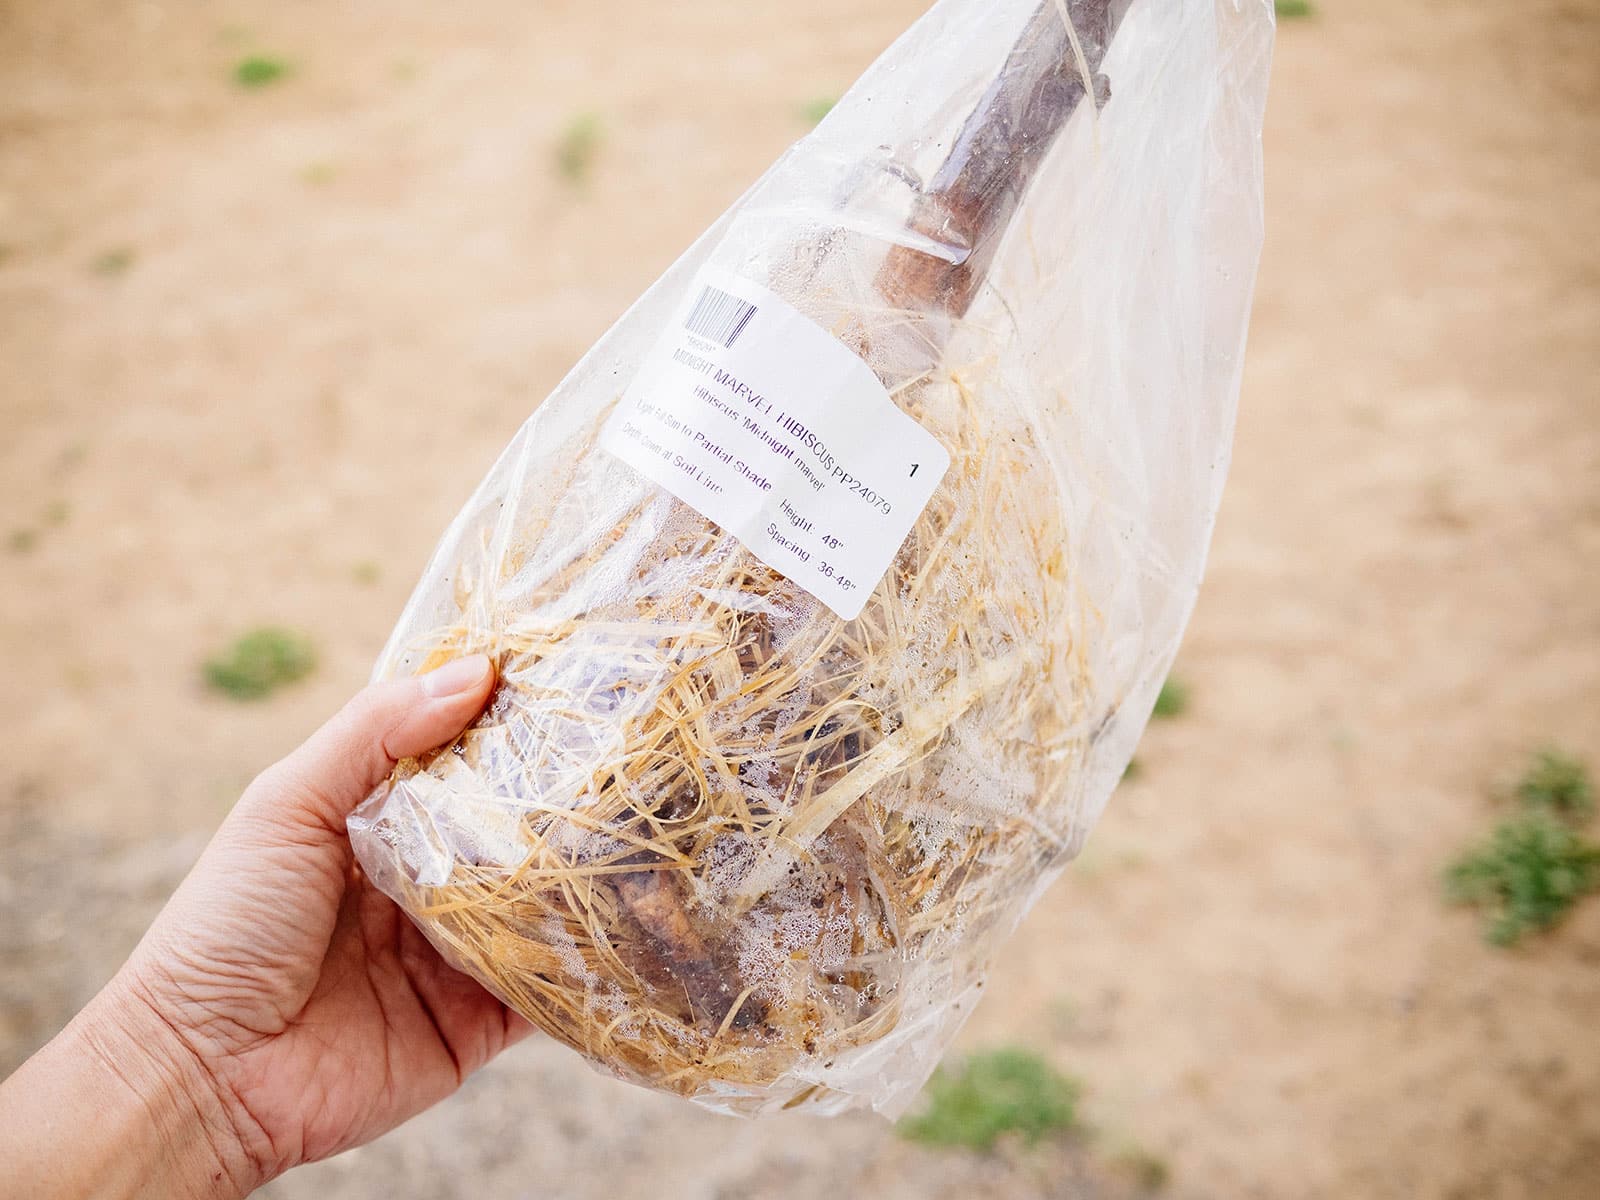 Hand holding a clear plastic bag with a bare-root perennial plant inside, wrapped in damp wood shavings